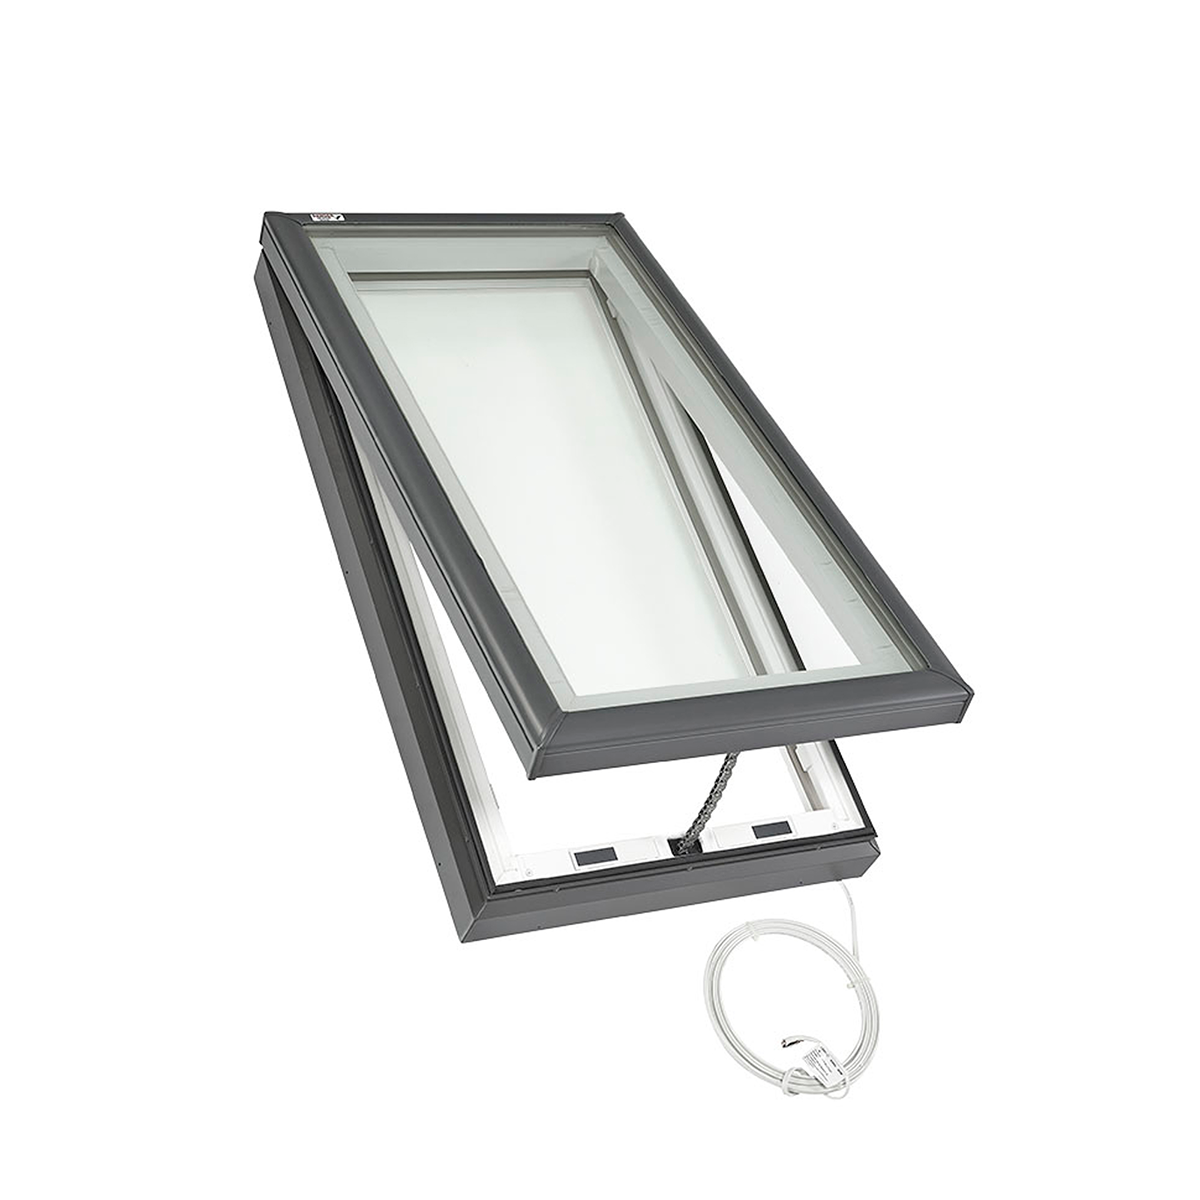 Electric Curb-Mount Skylight with Laminated Low-E3 Glass - 22-1/2 in. x 22-1/2 in. - VCE 2222